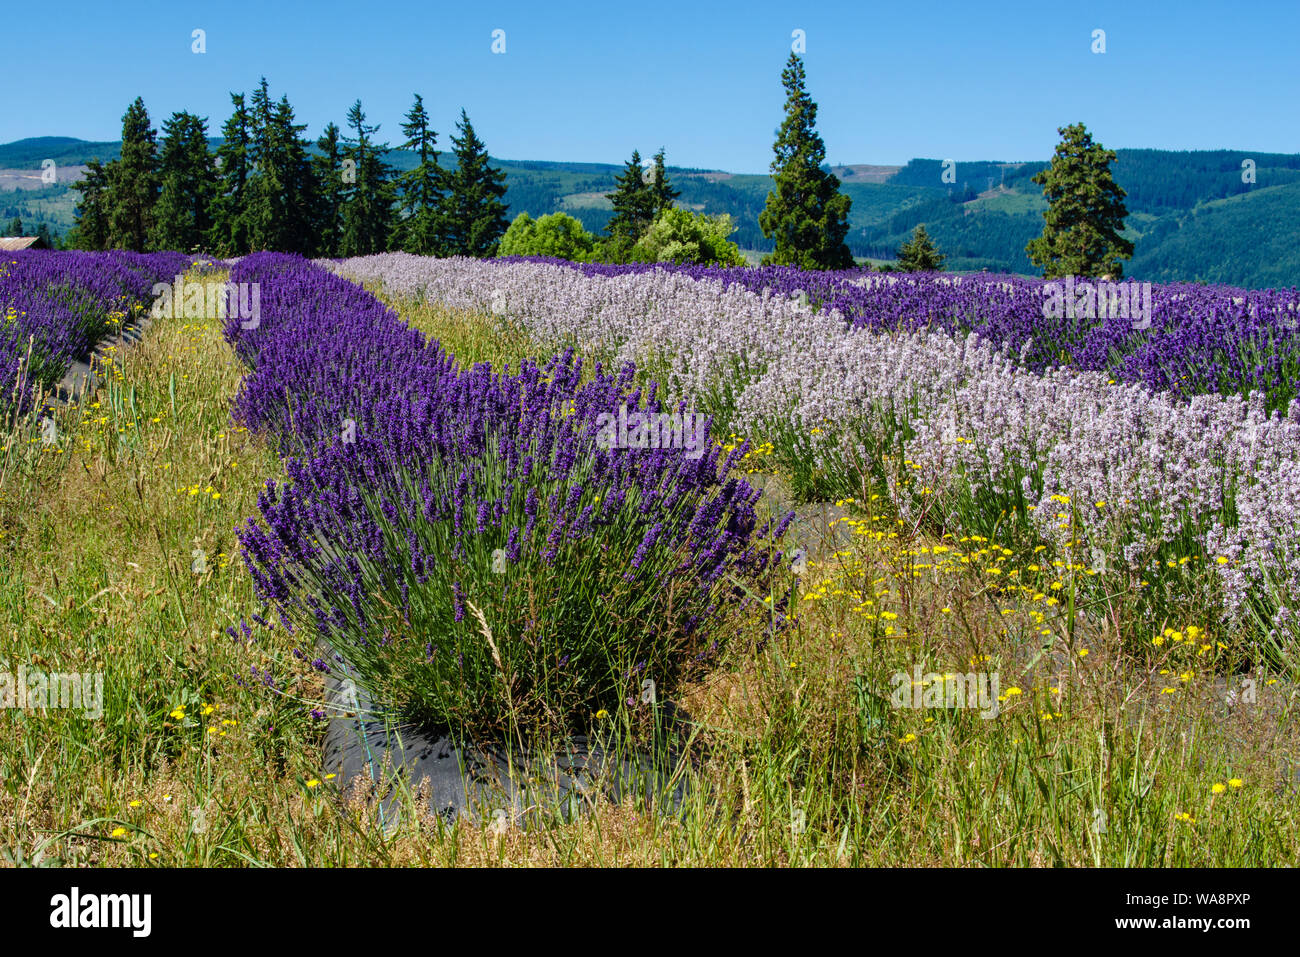 Lavender in full bloom at a lavender farm near Parkdale, Oregon Stock Photo